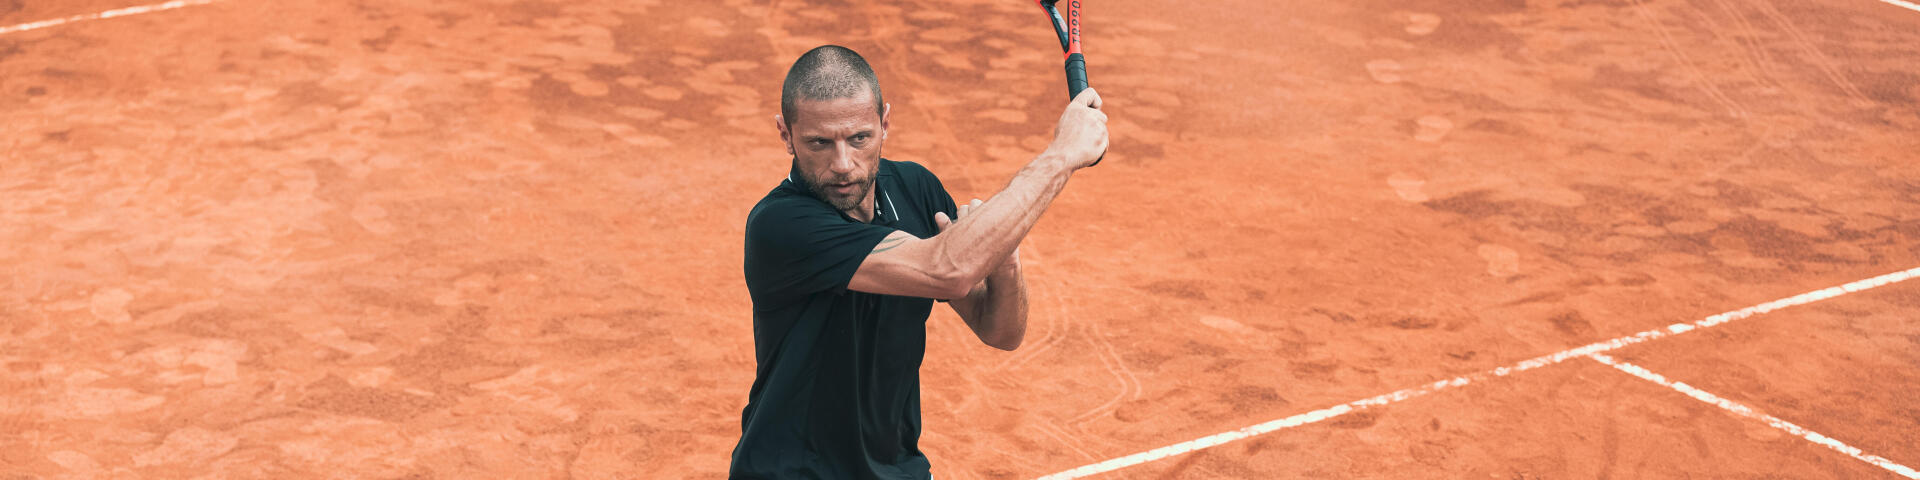 tennis-2-exercises-to-prepare-for-clay